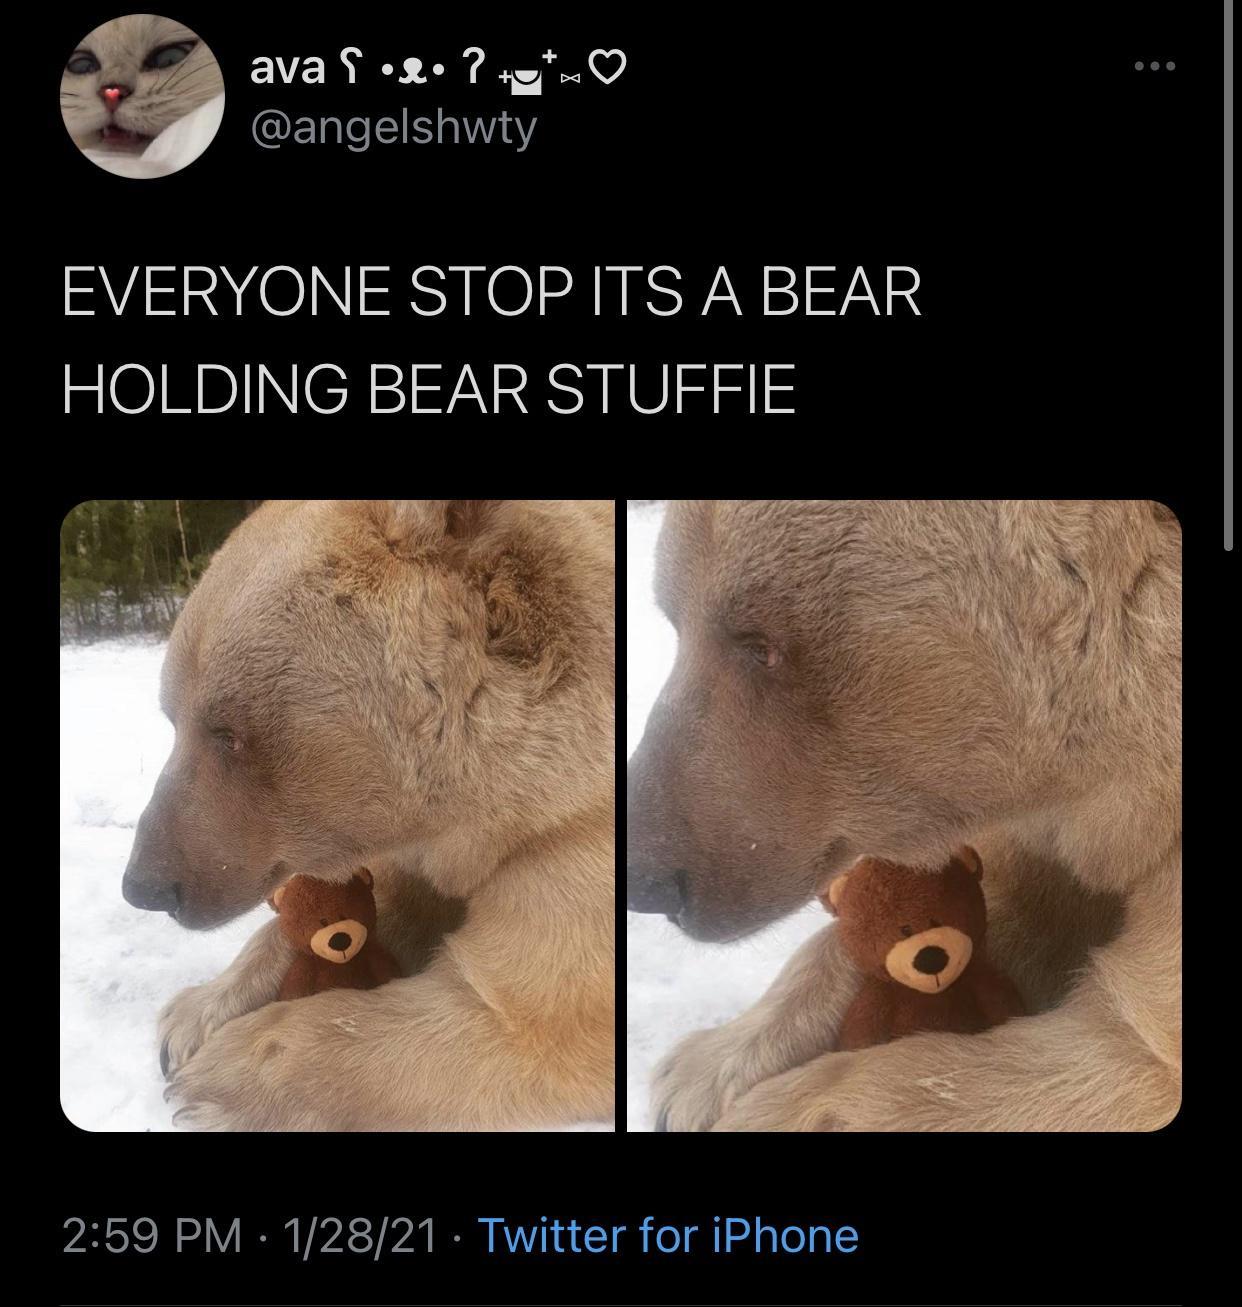 fauna - ava ...? Everyone Stop Its A Bear Holding Bear Stuffie 12821 Twitter for iPhone